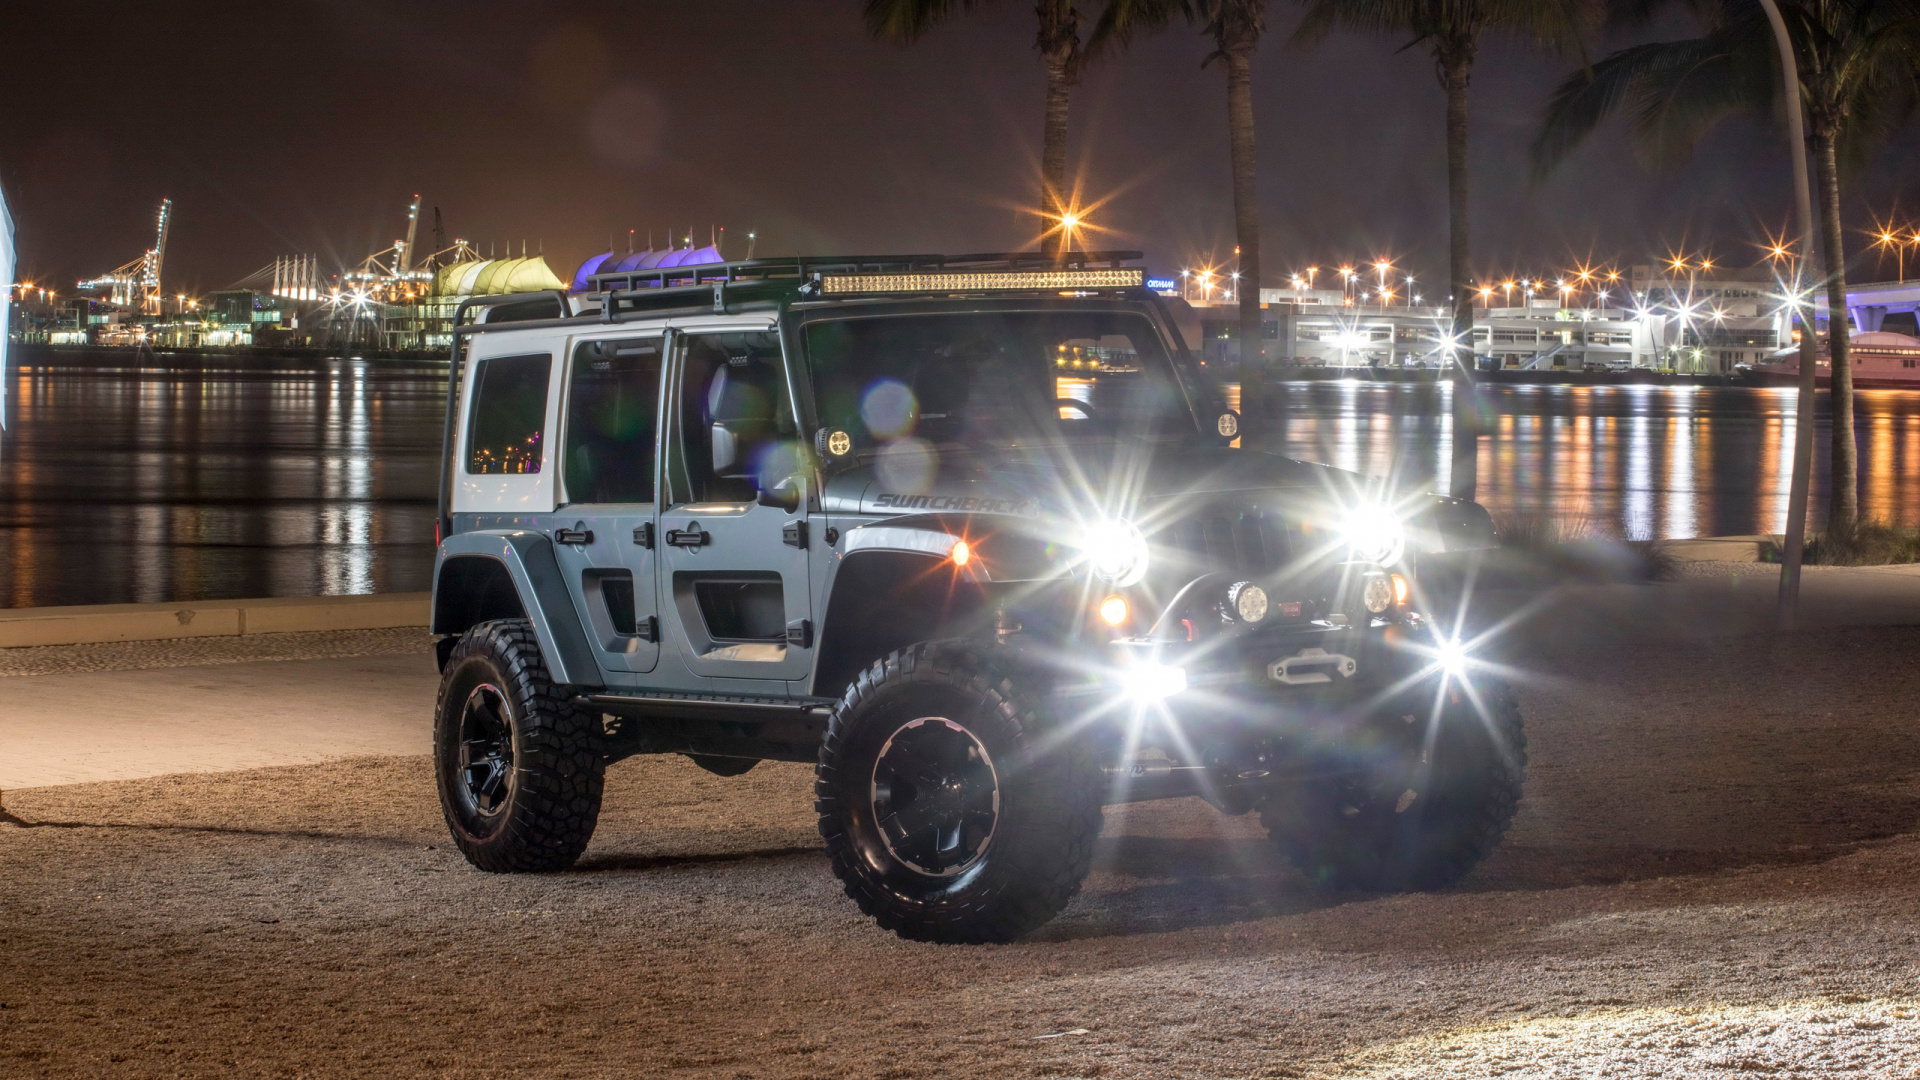 Black and White Jeep Wrangler on Road During Night Time. Wallpaper in 1920x1080 Resolution